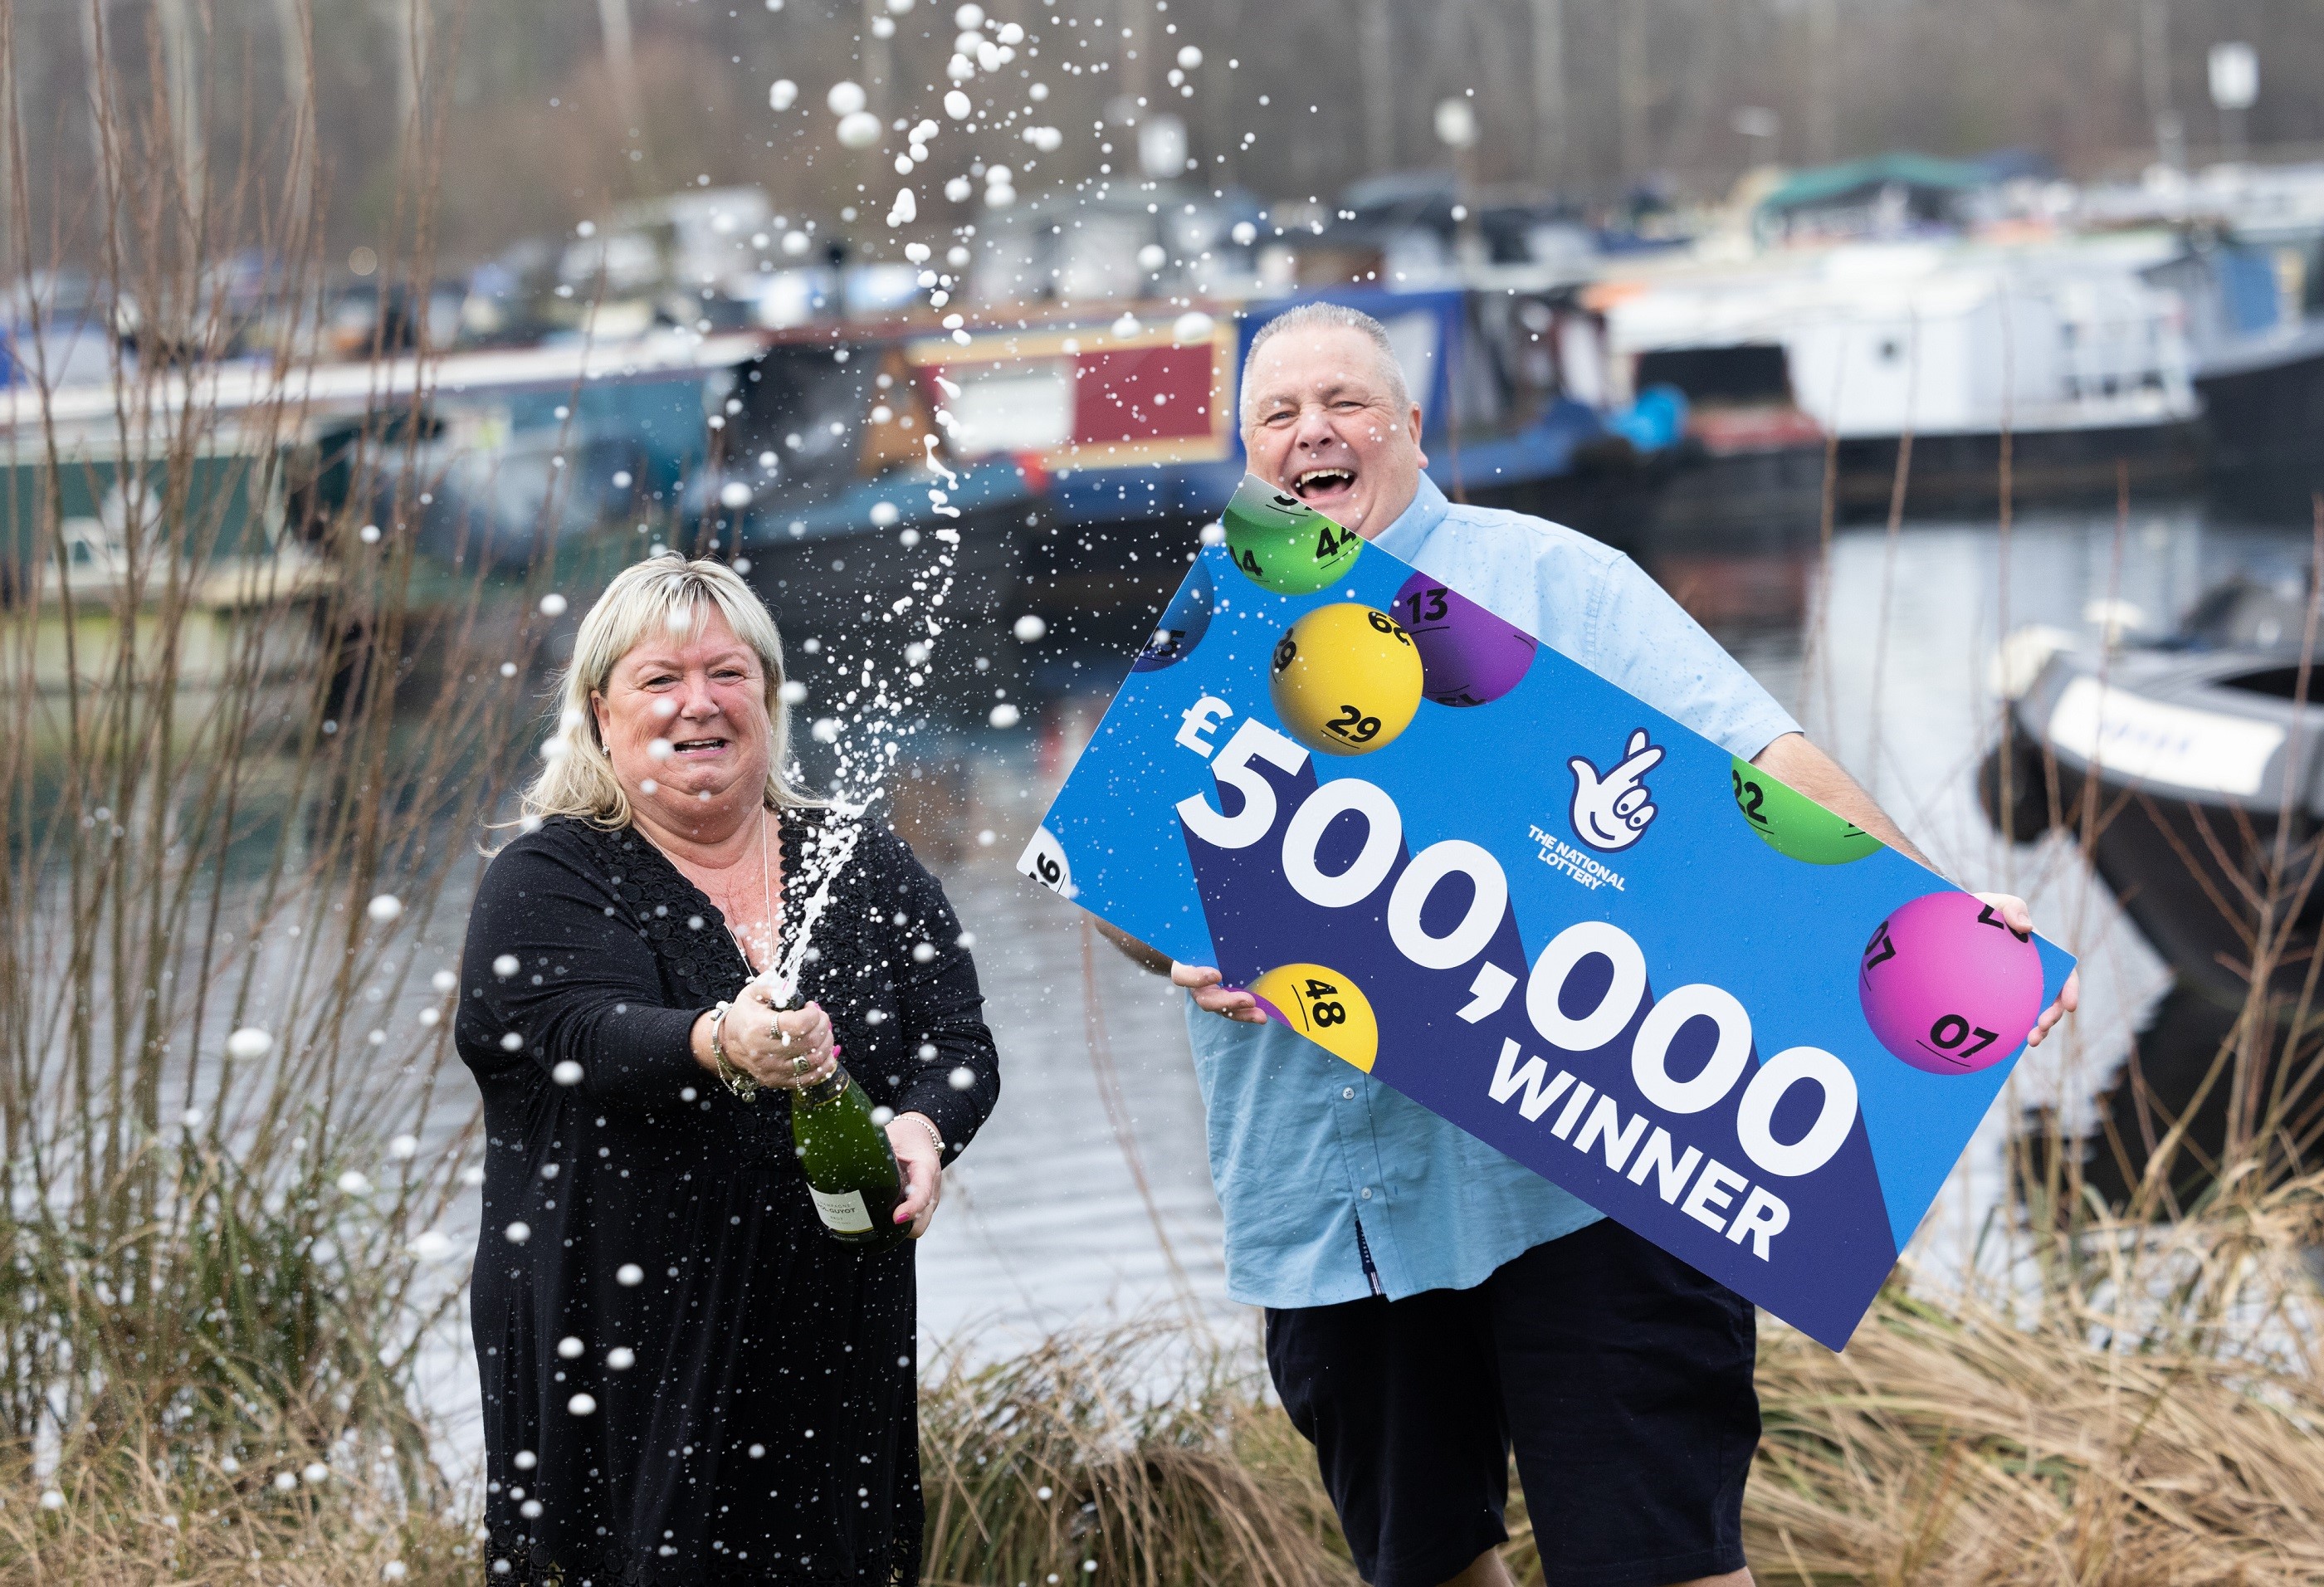 Jeff Etherington, 65, of Harlow, Essex, celebrates with his finacee Kim Read after winning £500,000 on the lottery. (National Lottery/ PA)